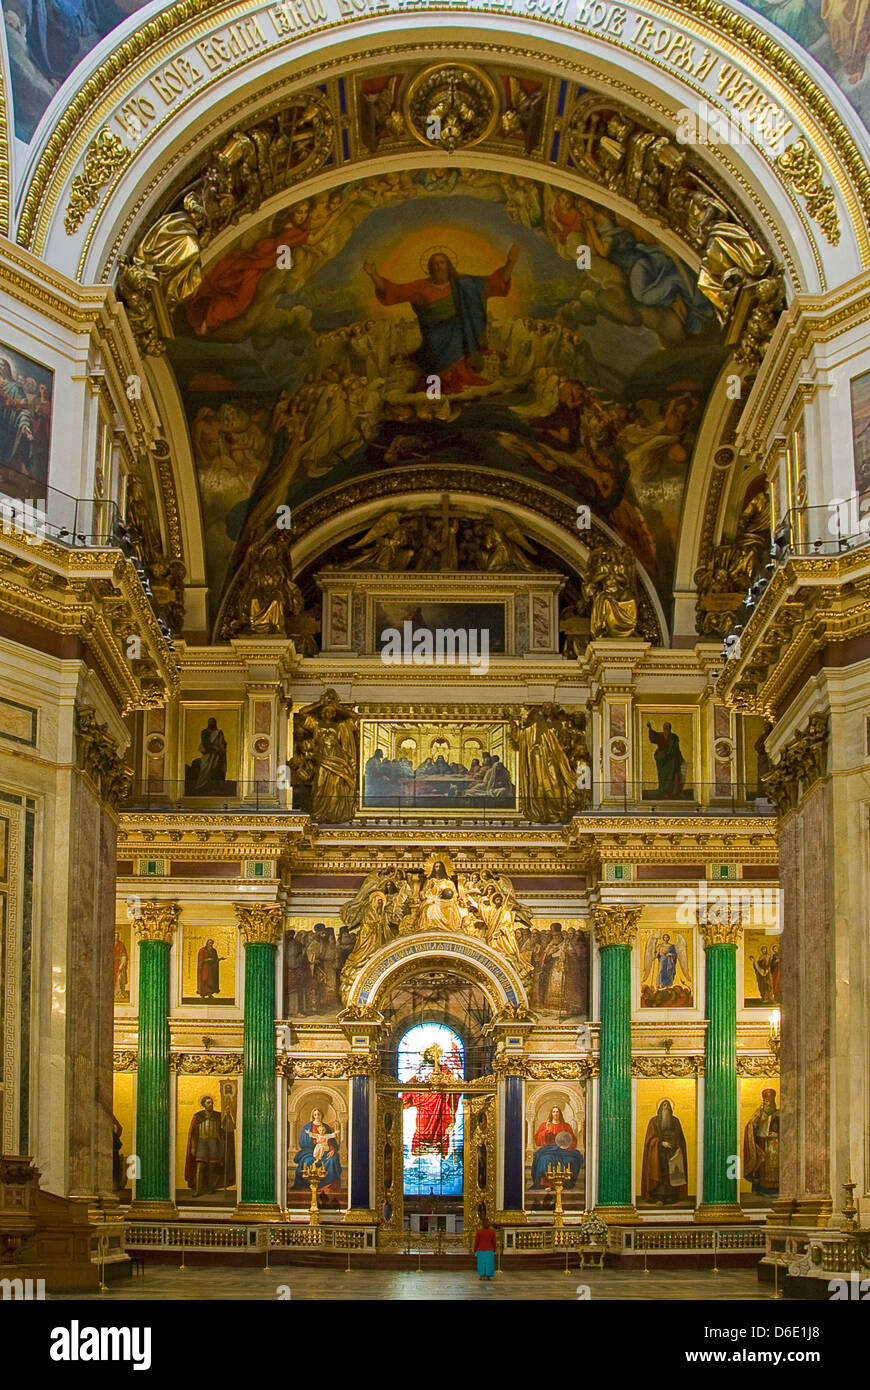 Inside St Isaac's Cathedral, St Petersburg, Russia Stock Photo